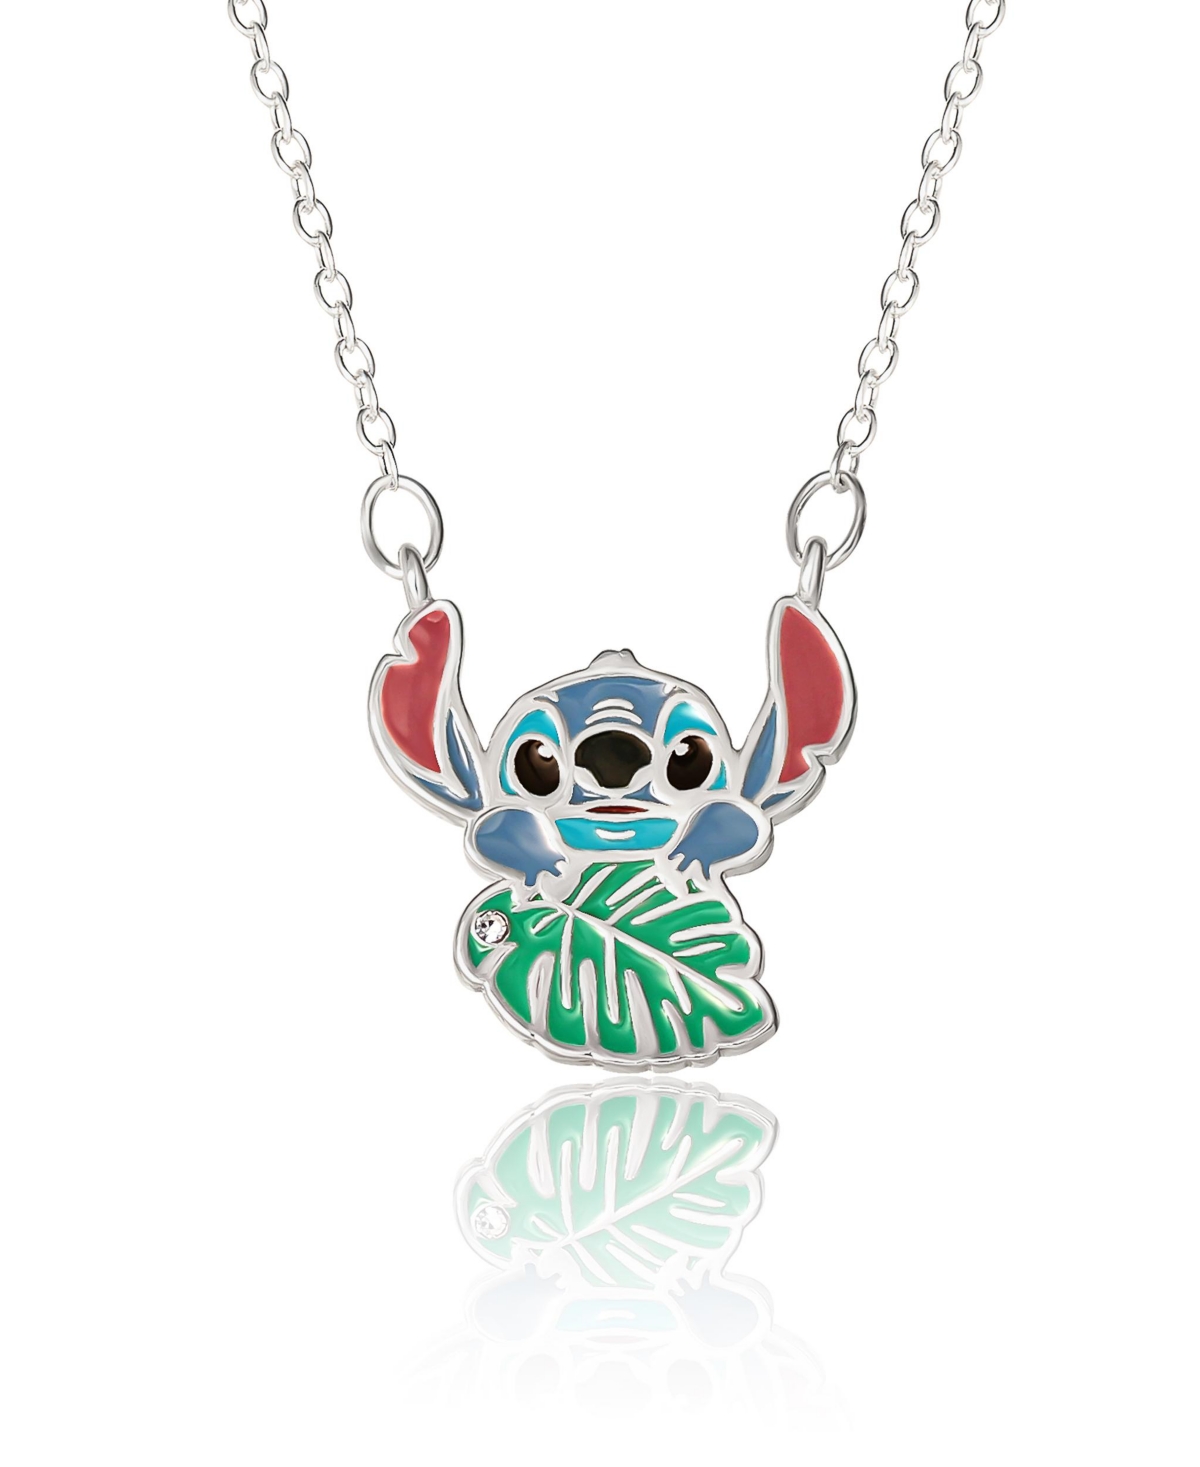 Lilo and Stitch Silver Plated Stitch Leaf Pendant Necklace - Green, blue, silver tone